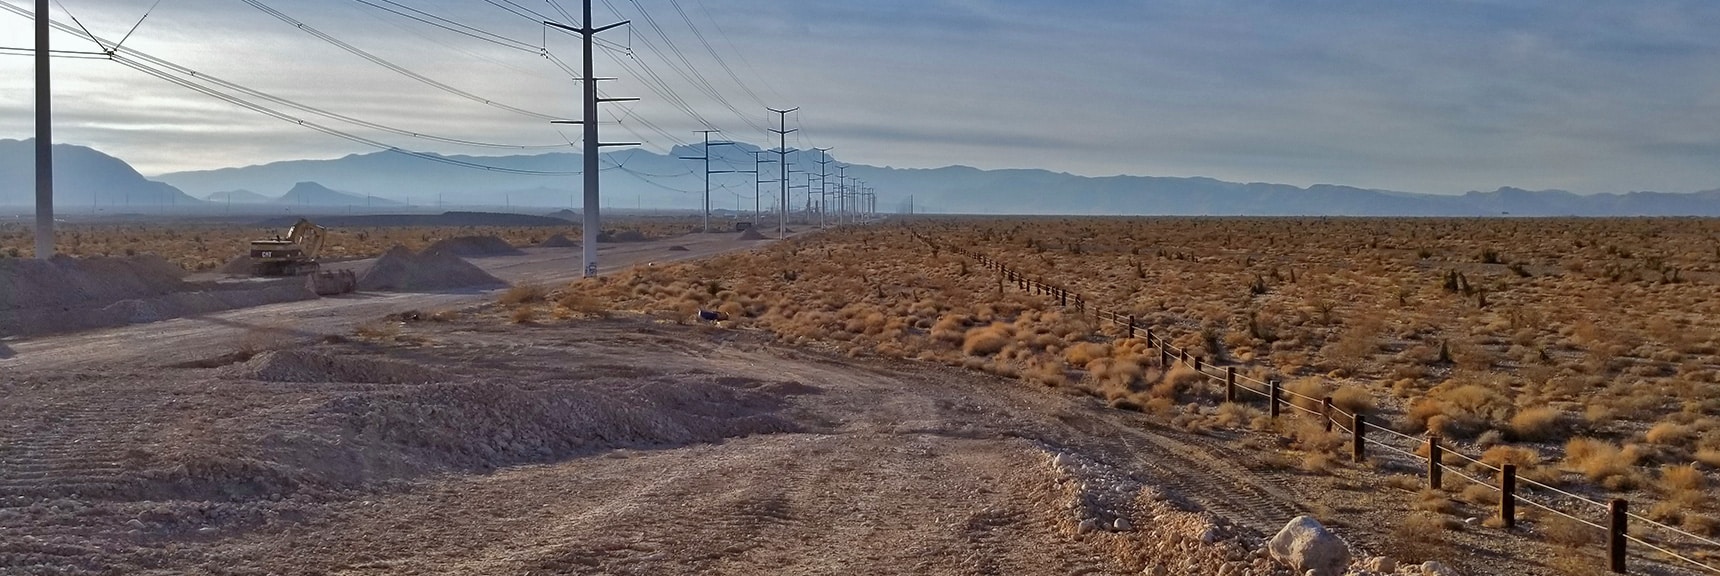 View West Down Moccasin Toward Hwy 95 and Me Charleston Wilderness. | Snapshot of Las Vegas Northern Growth Edge on January 3, 2021